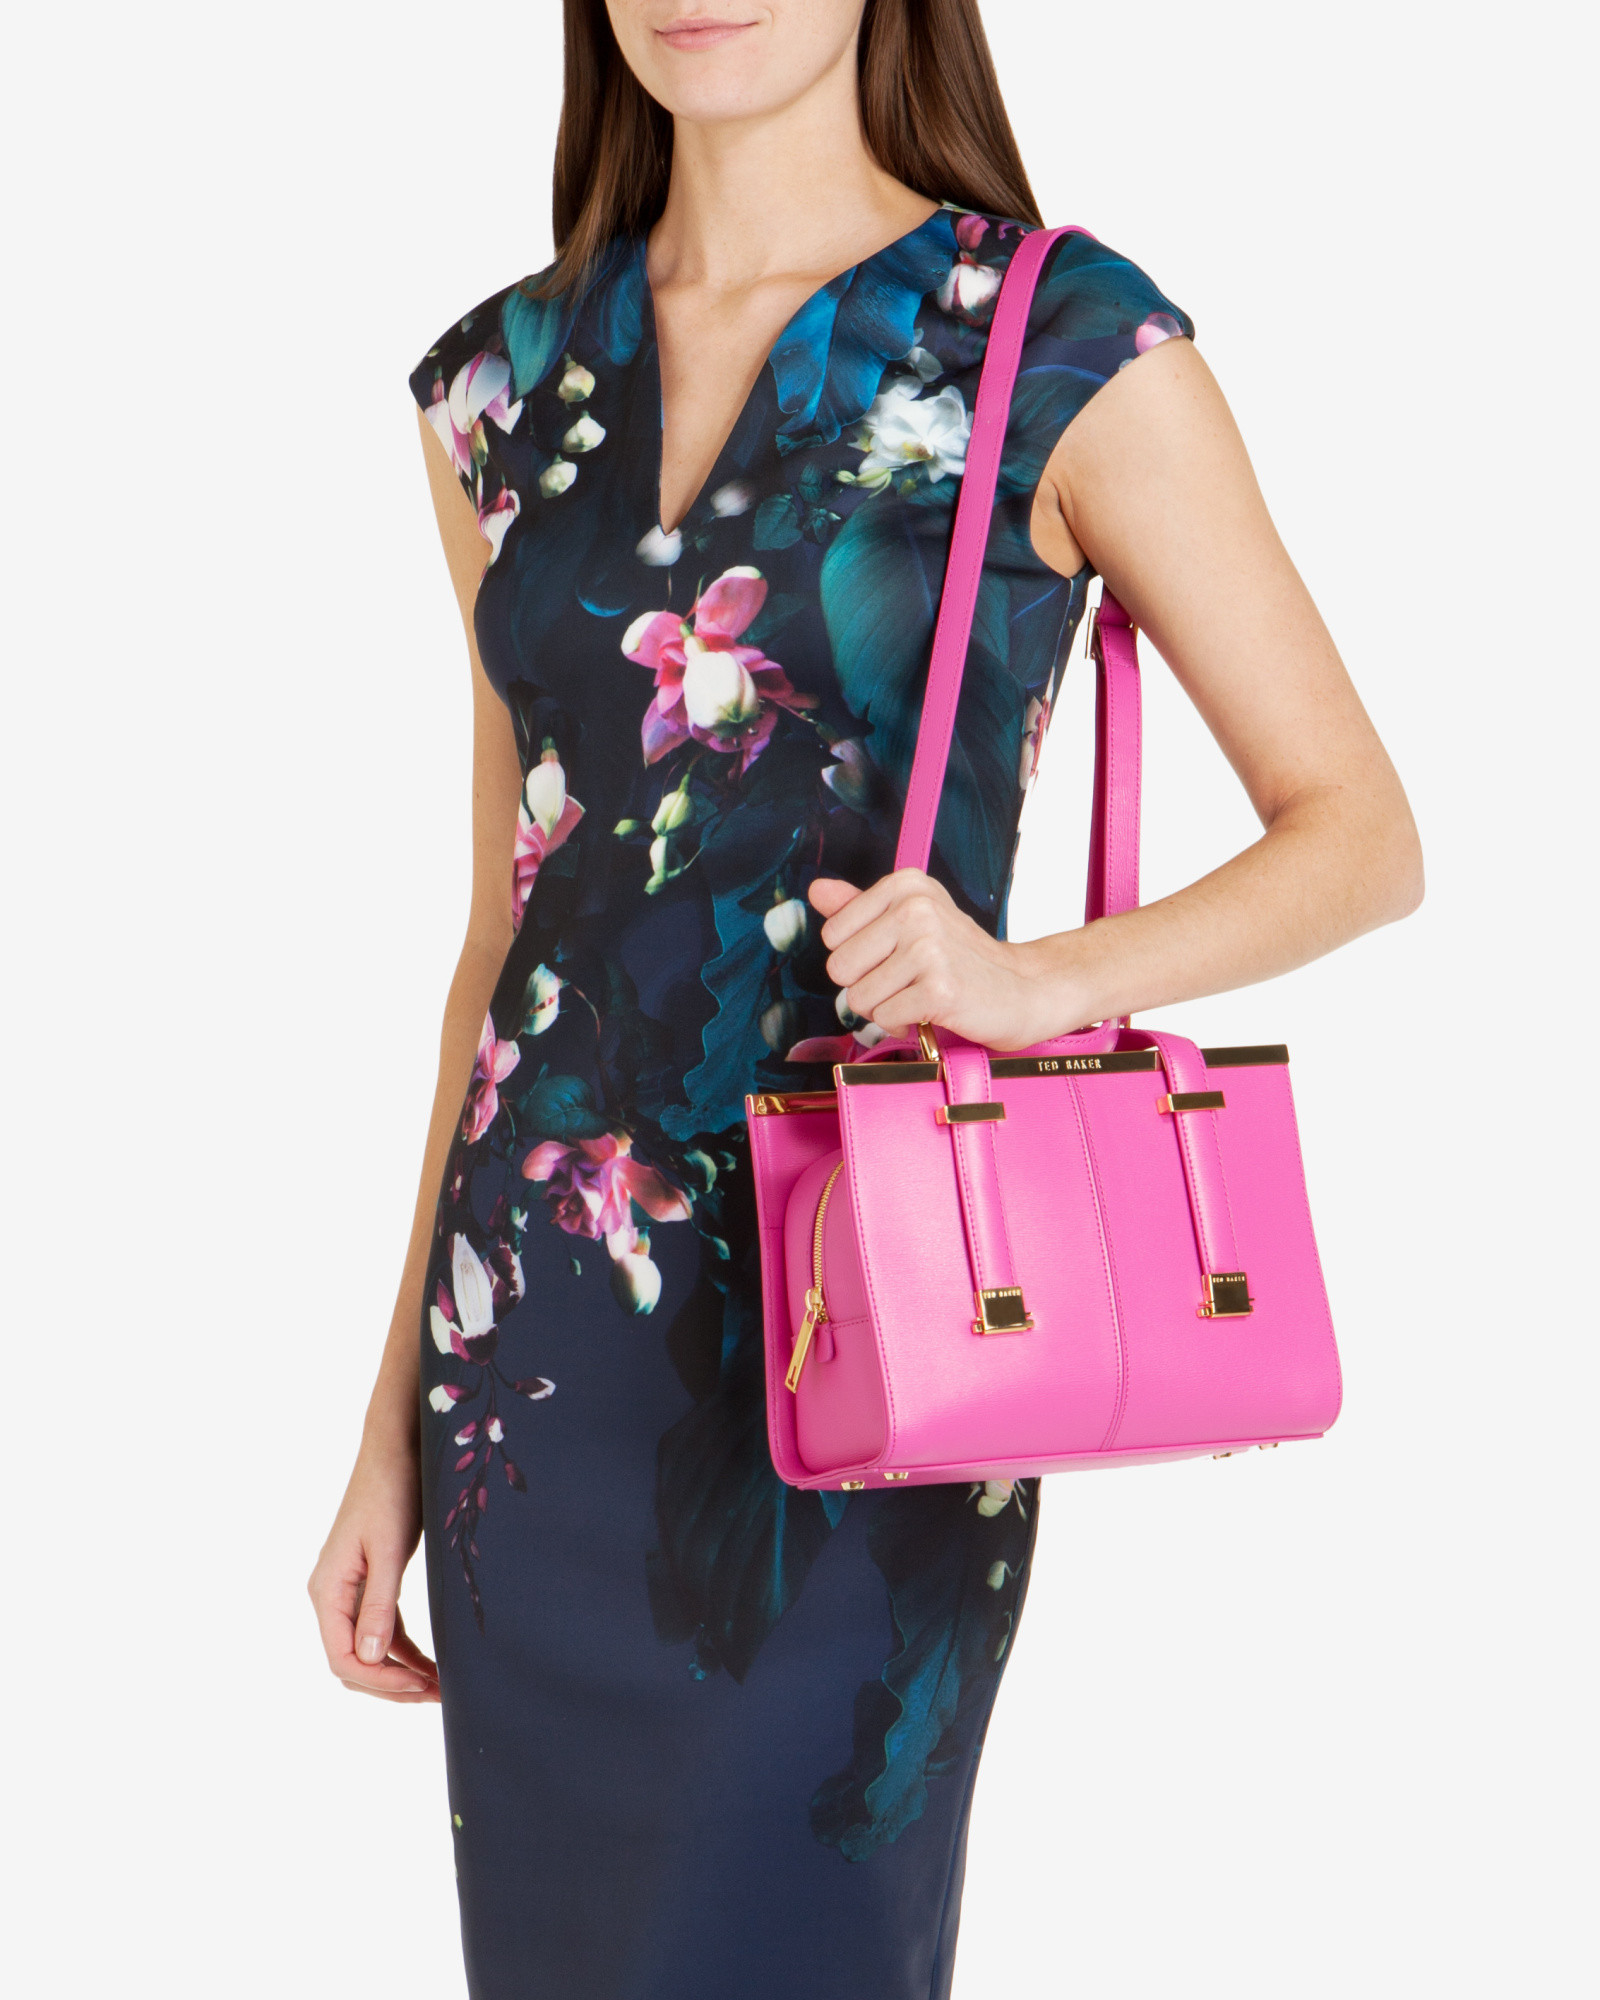 Ted Baker Small Crosshatch Leather Tote Bag in Bright Pink (Pink) - Lyst